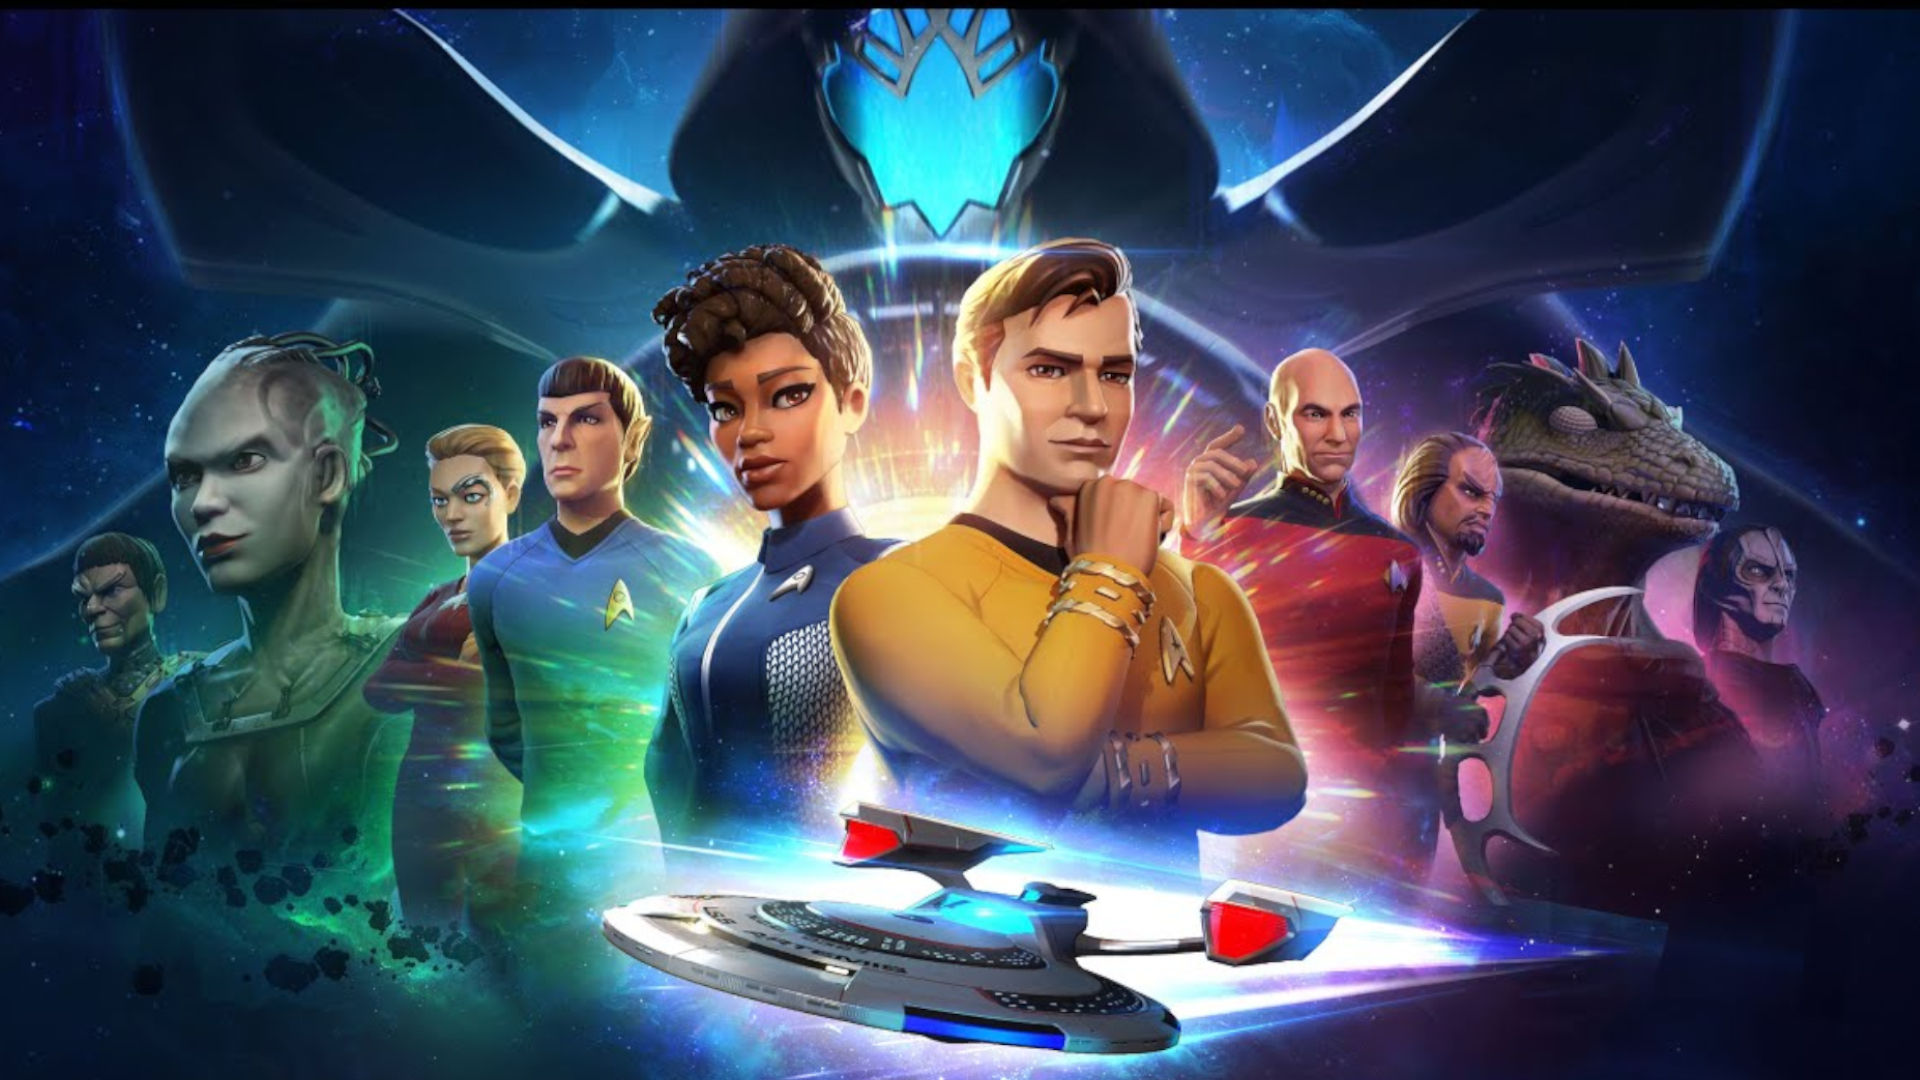 Best space games: Star Trek Legends. Image shows a selection of characters from the Star Trek universe, including Kirk, Spock, Picard, a Gorn, Word, and others. There is also an image of a federation ship flying towards the camera.